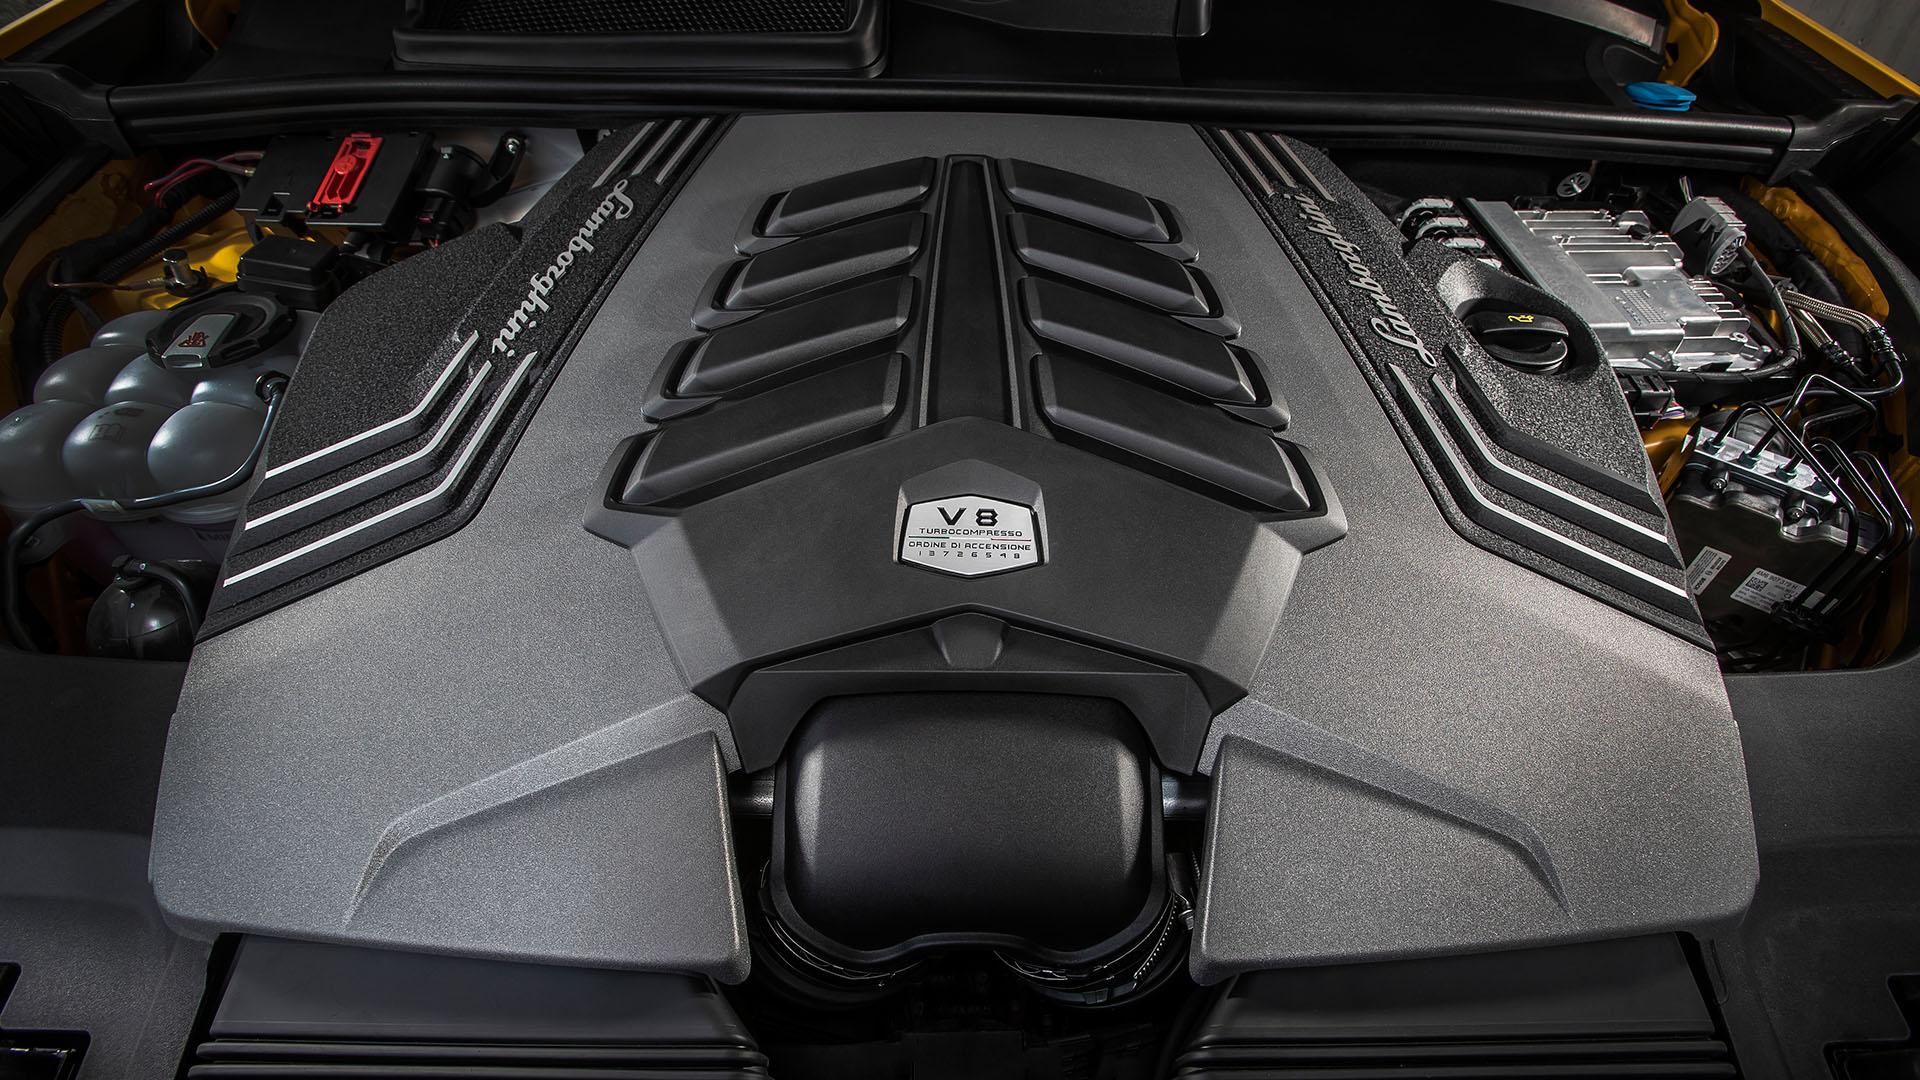 4-Liter V8 engine used in the Urus